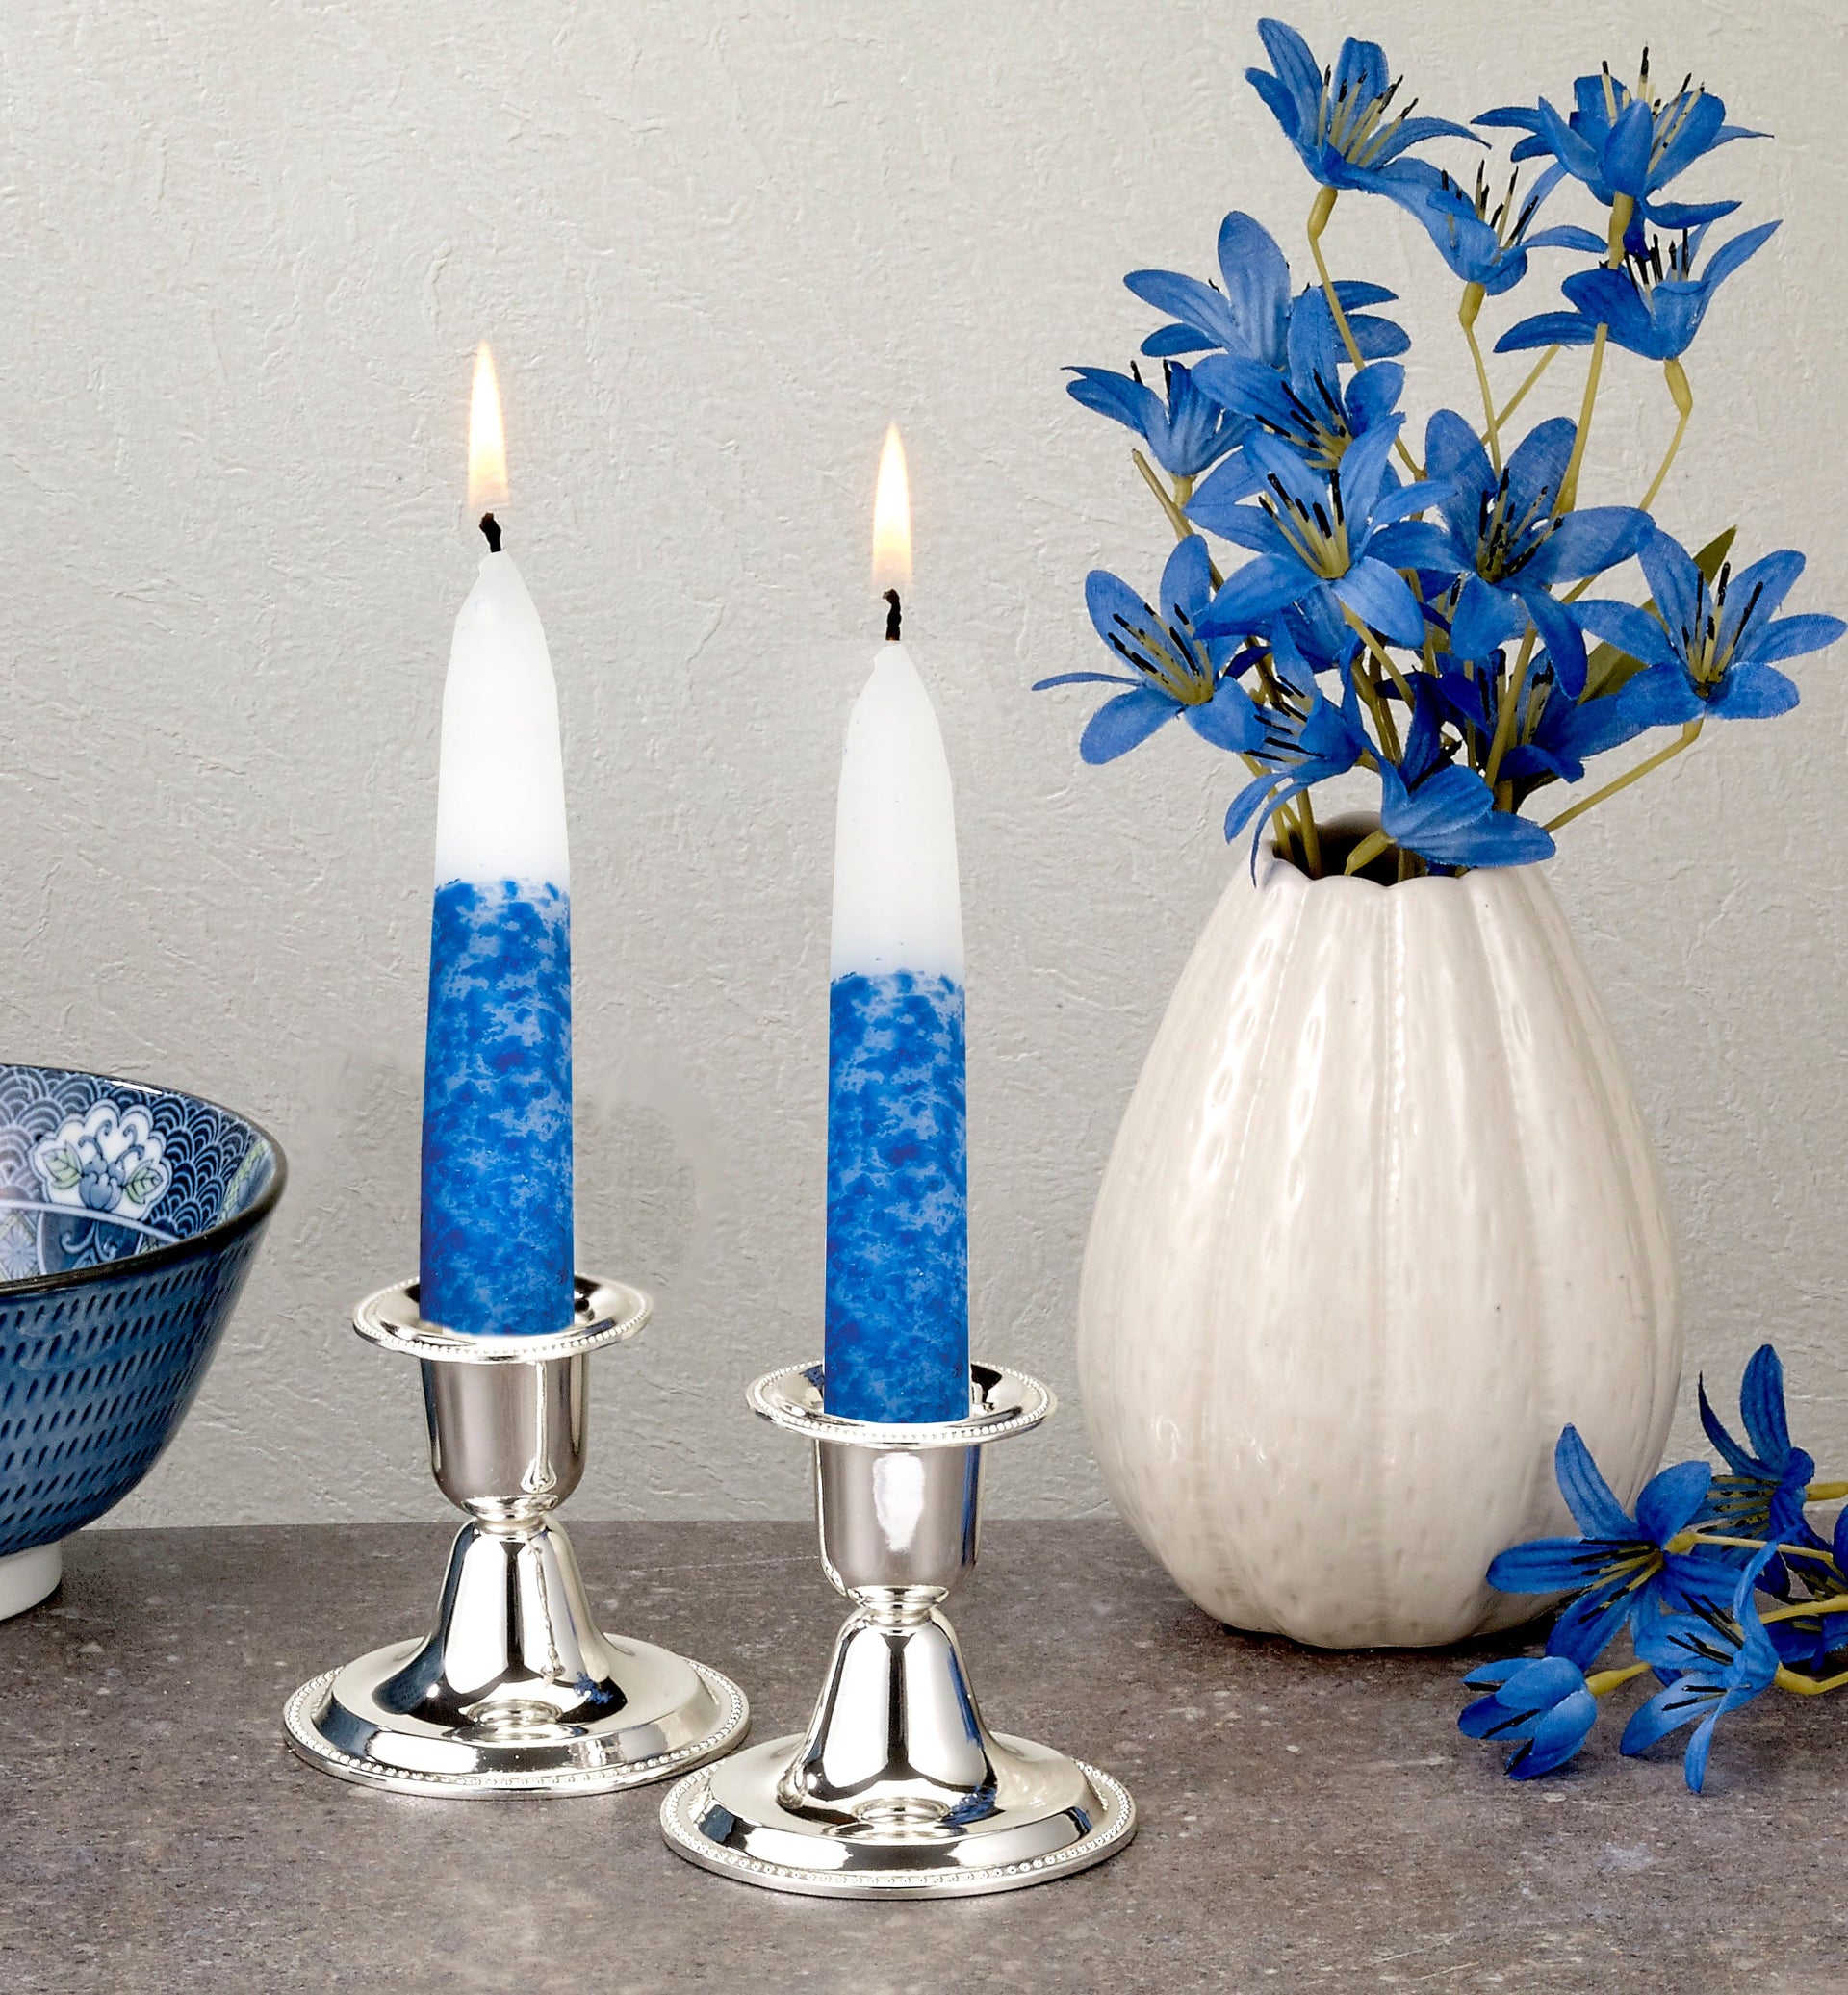 Rite Lite Shabbat Candles Hand-Decorated Blue and White Shabbat Candles | Set of 12